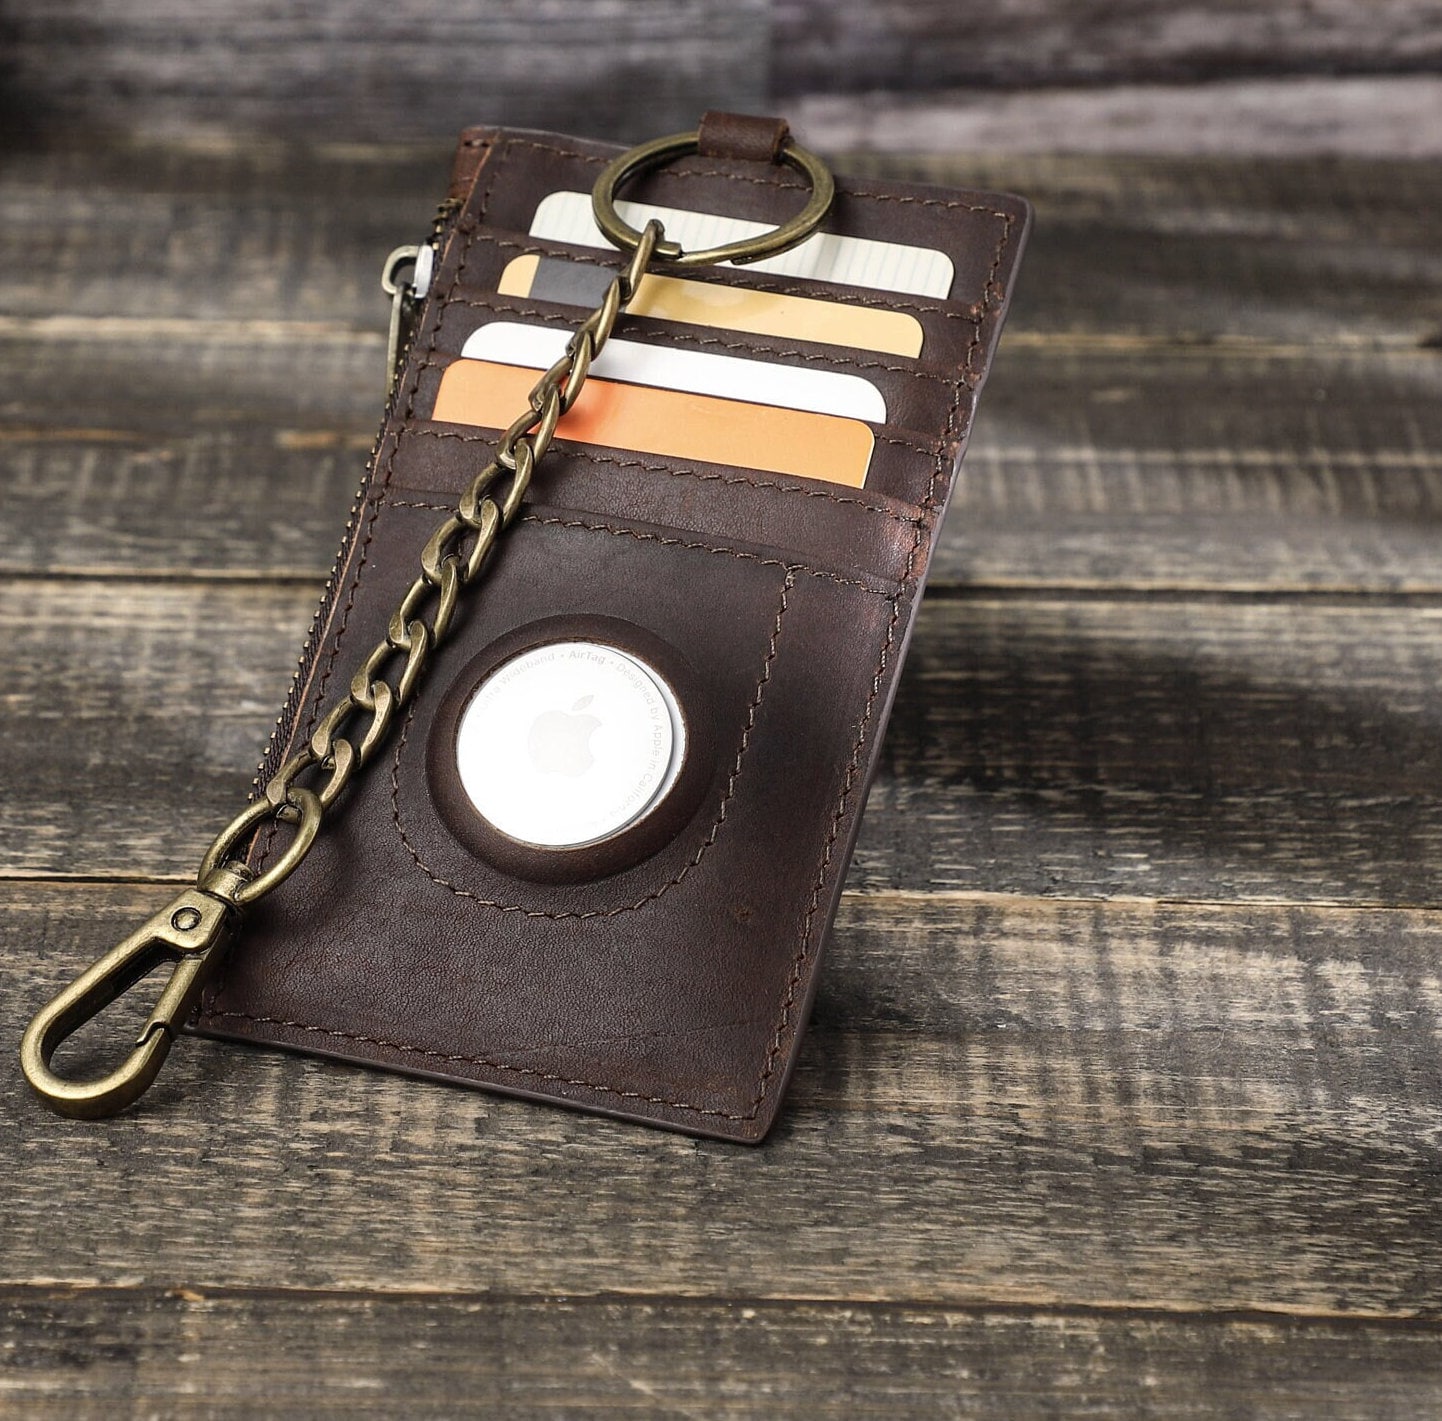 Minimalist AirTag Wallet, Leather Card Holder, Leather Keychain Card Holder, Gift for Men, Father's Day Gift, Boyfriend Gift, Gift for Him